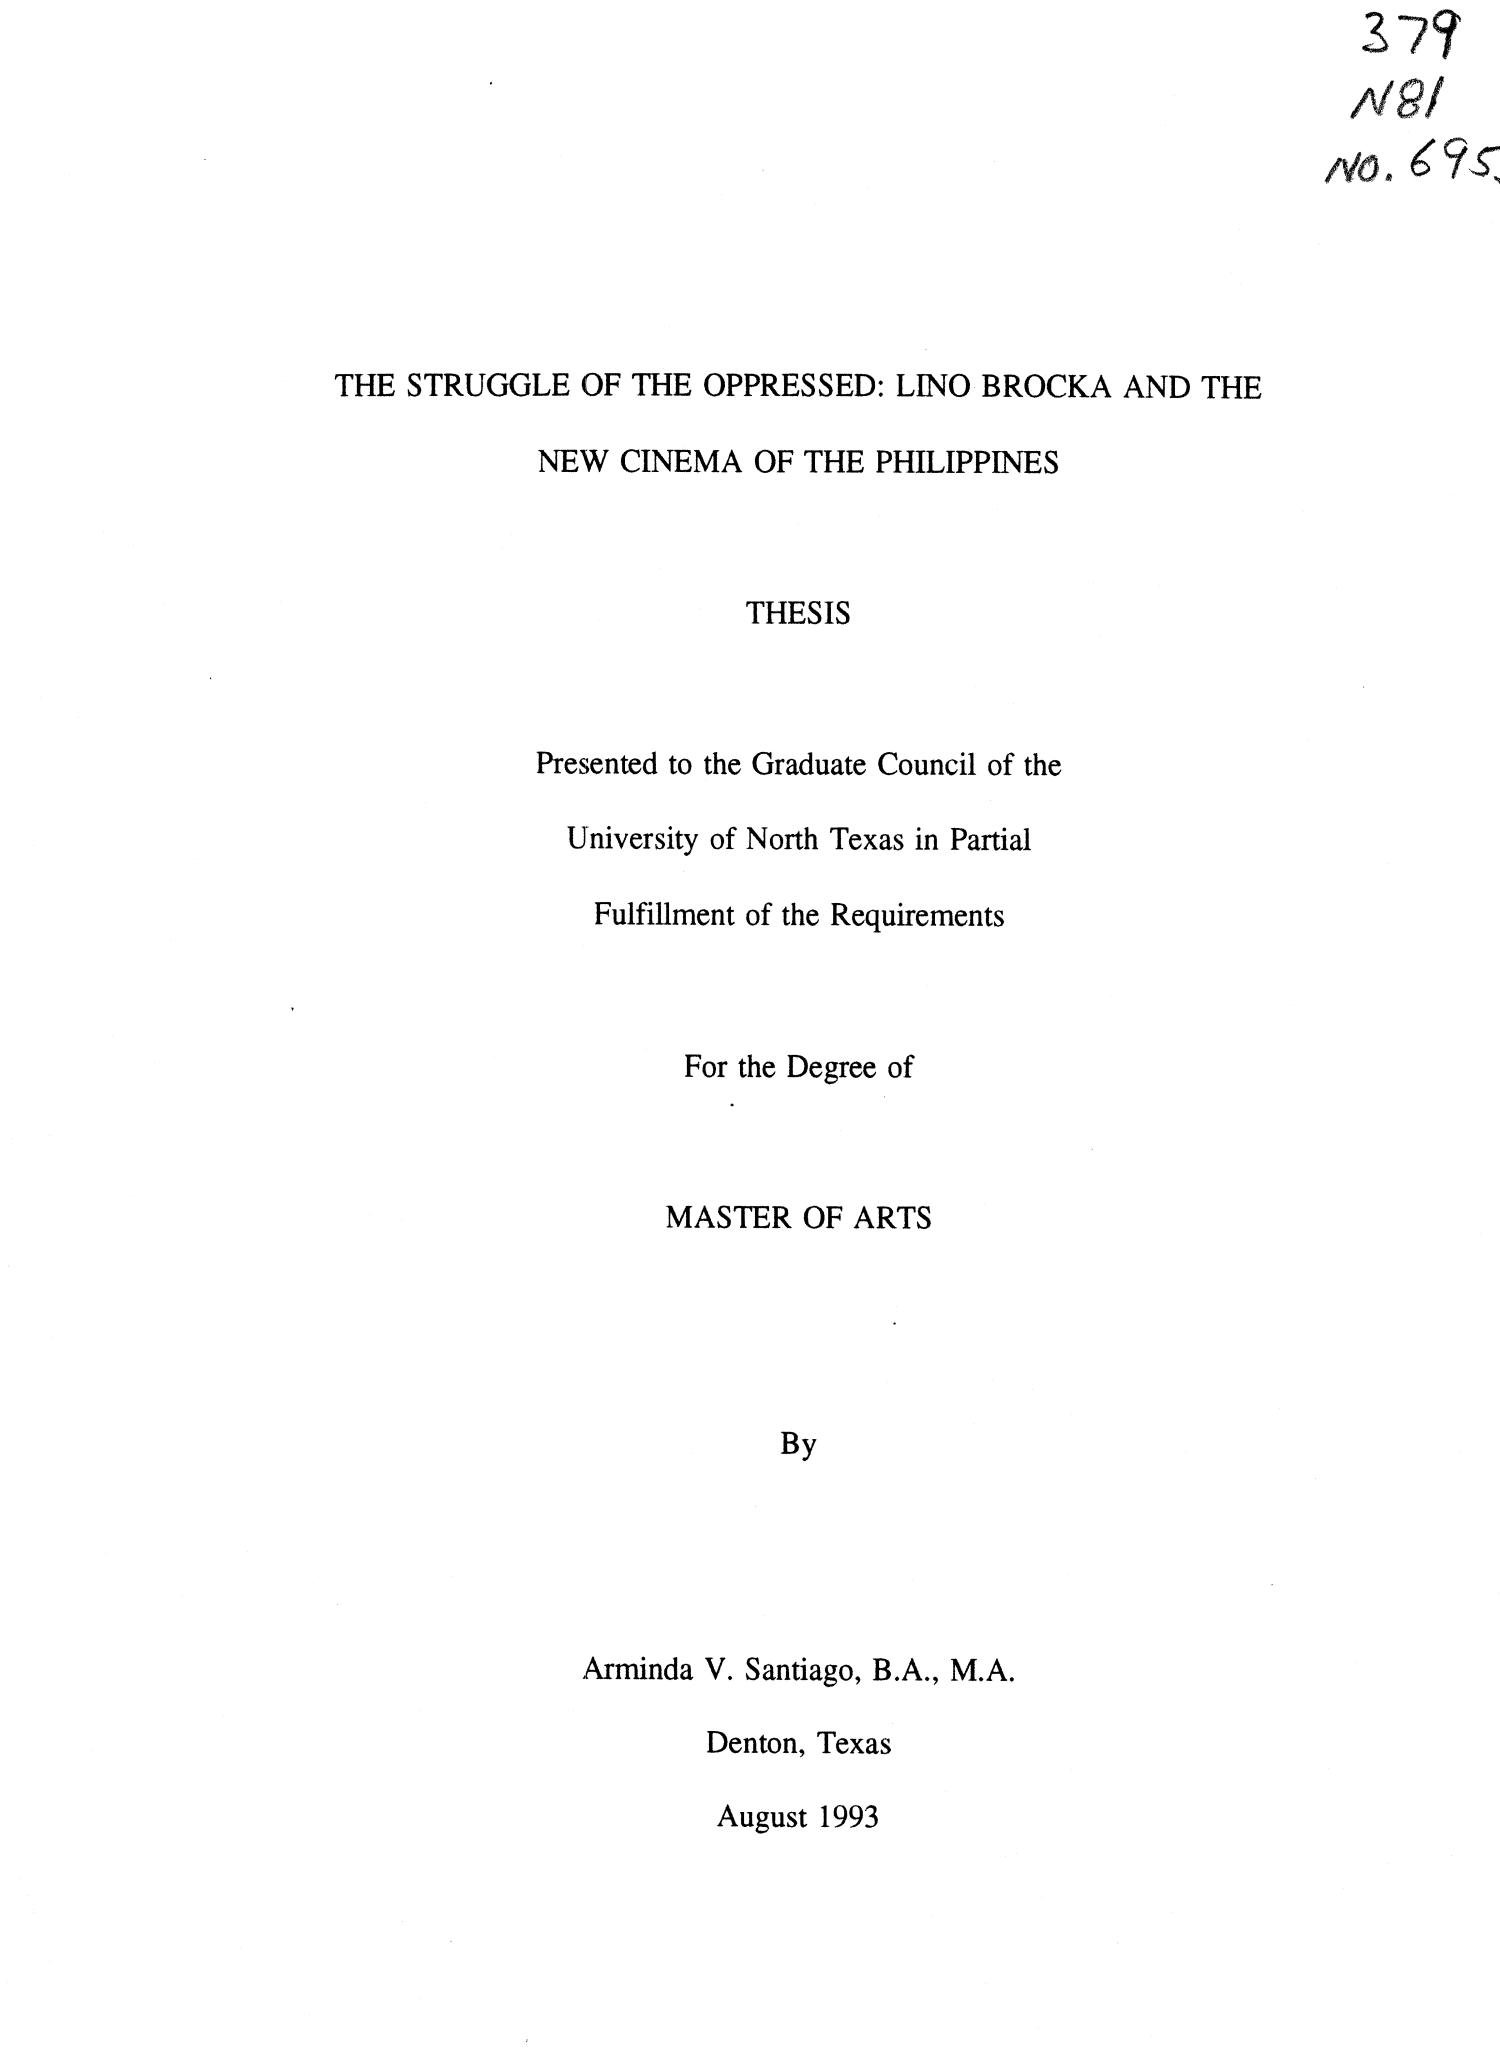 paper published thesis